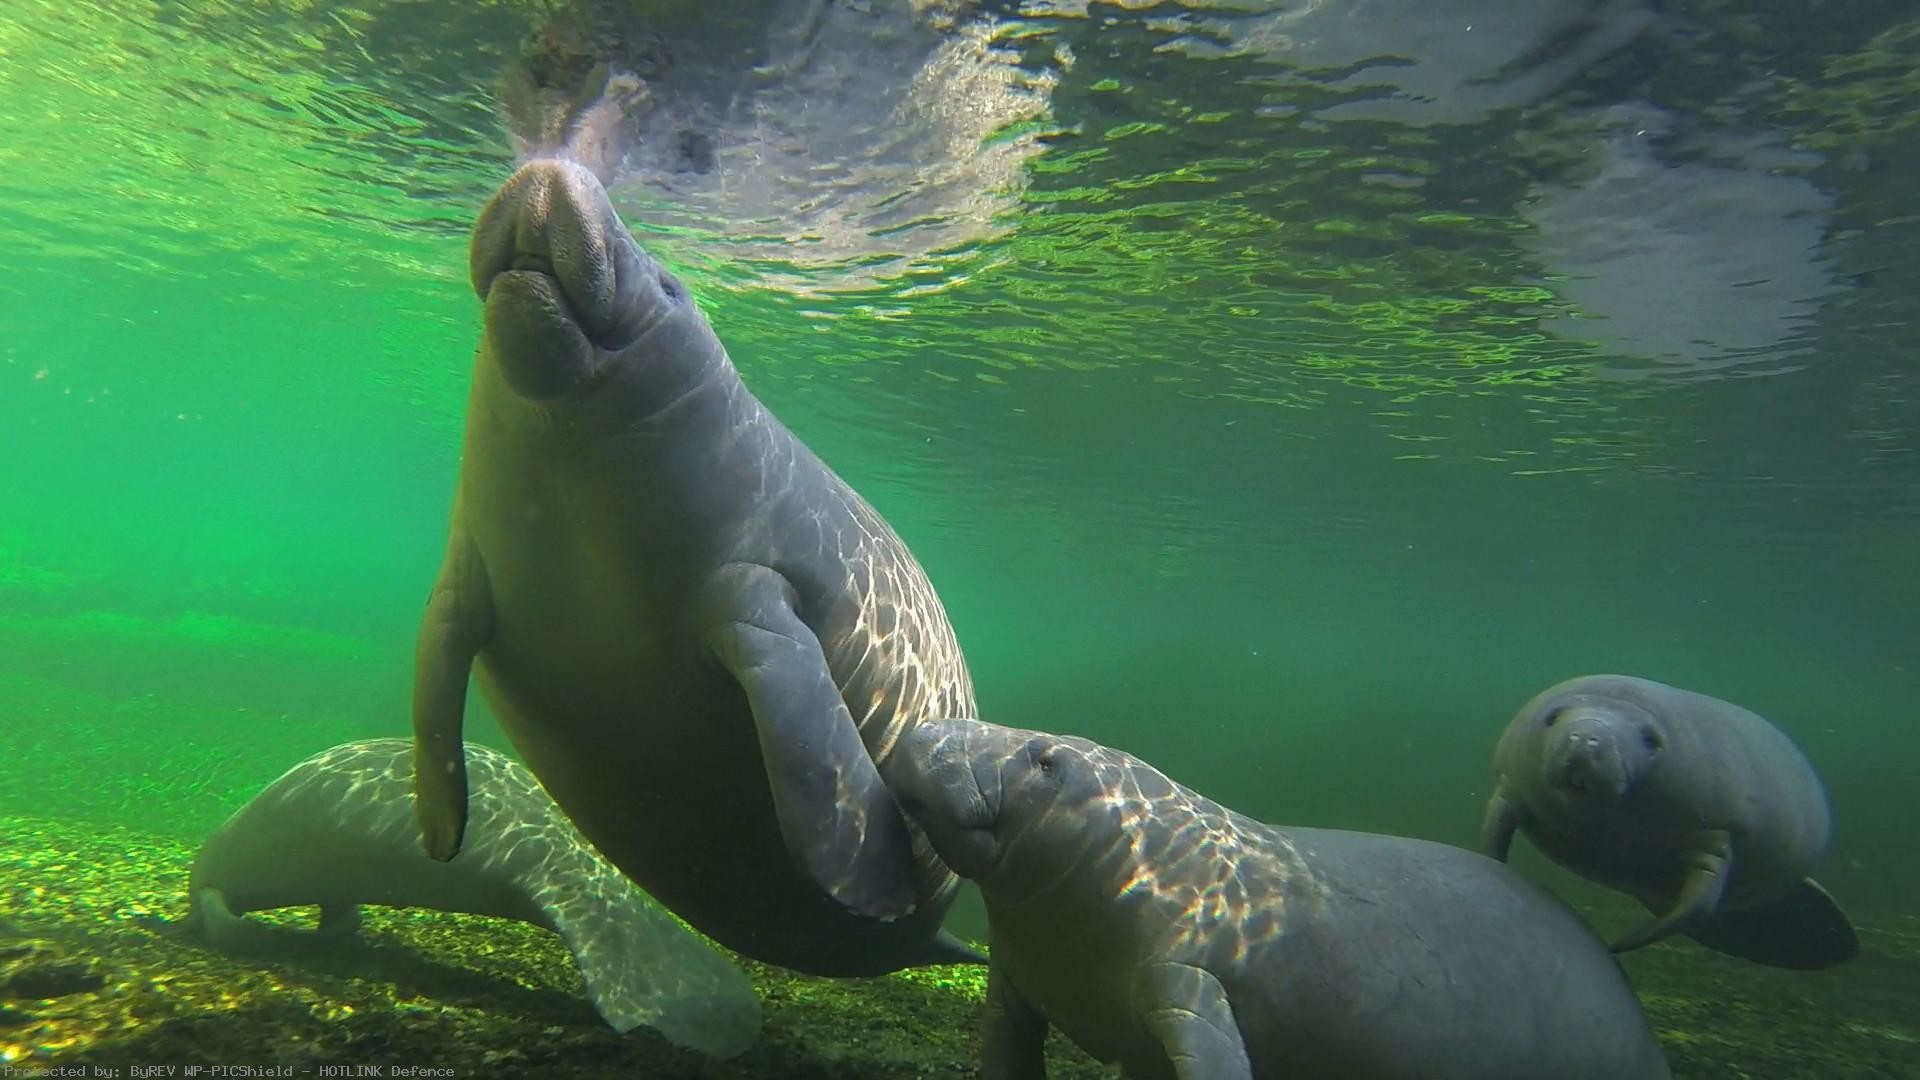 1920x1080 os-manatees-central-florida-pictures-1920%C3%971080-